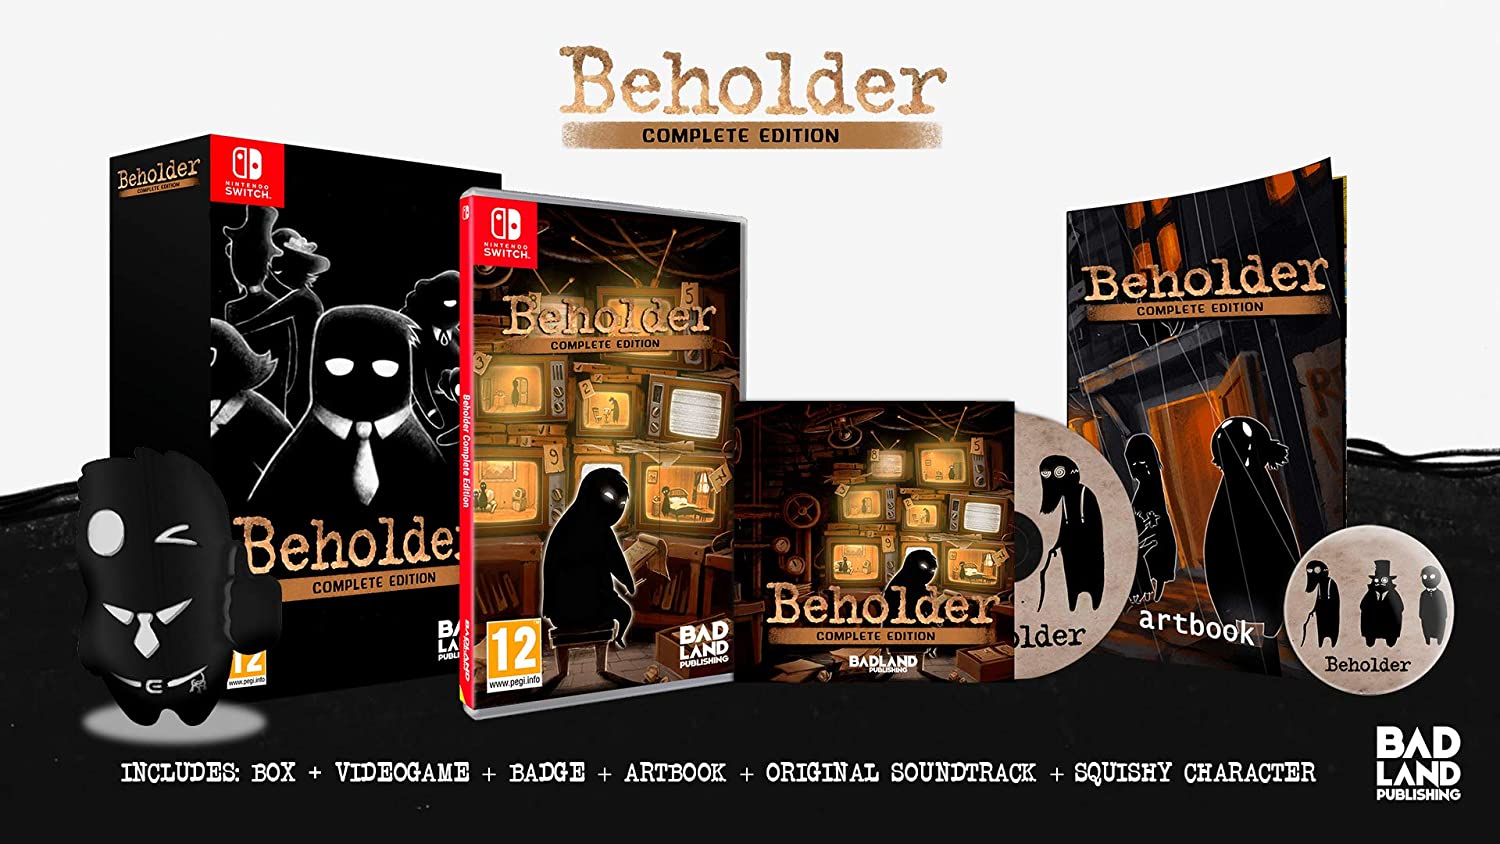 Beholder - Complete Collector's Edition (Switch), BADland Publishing